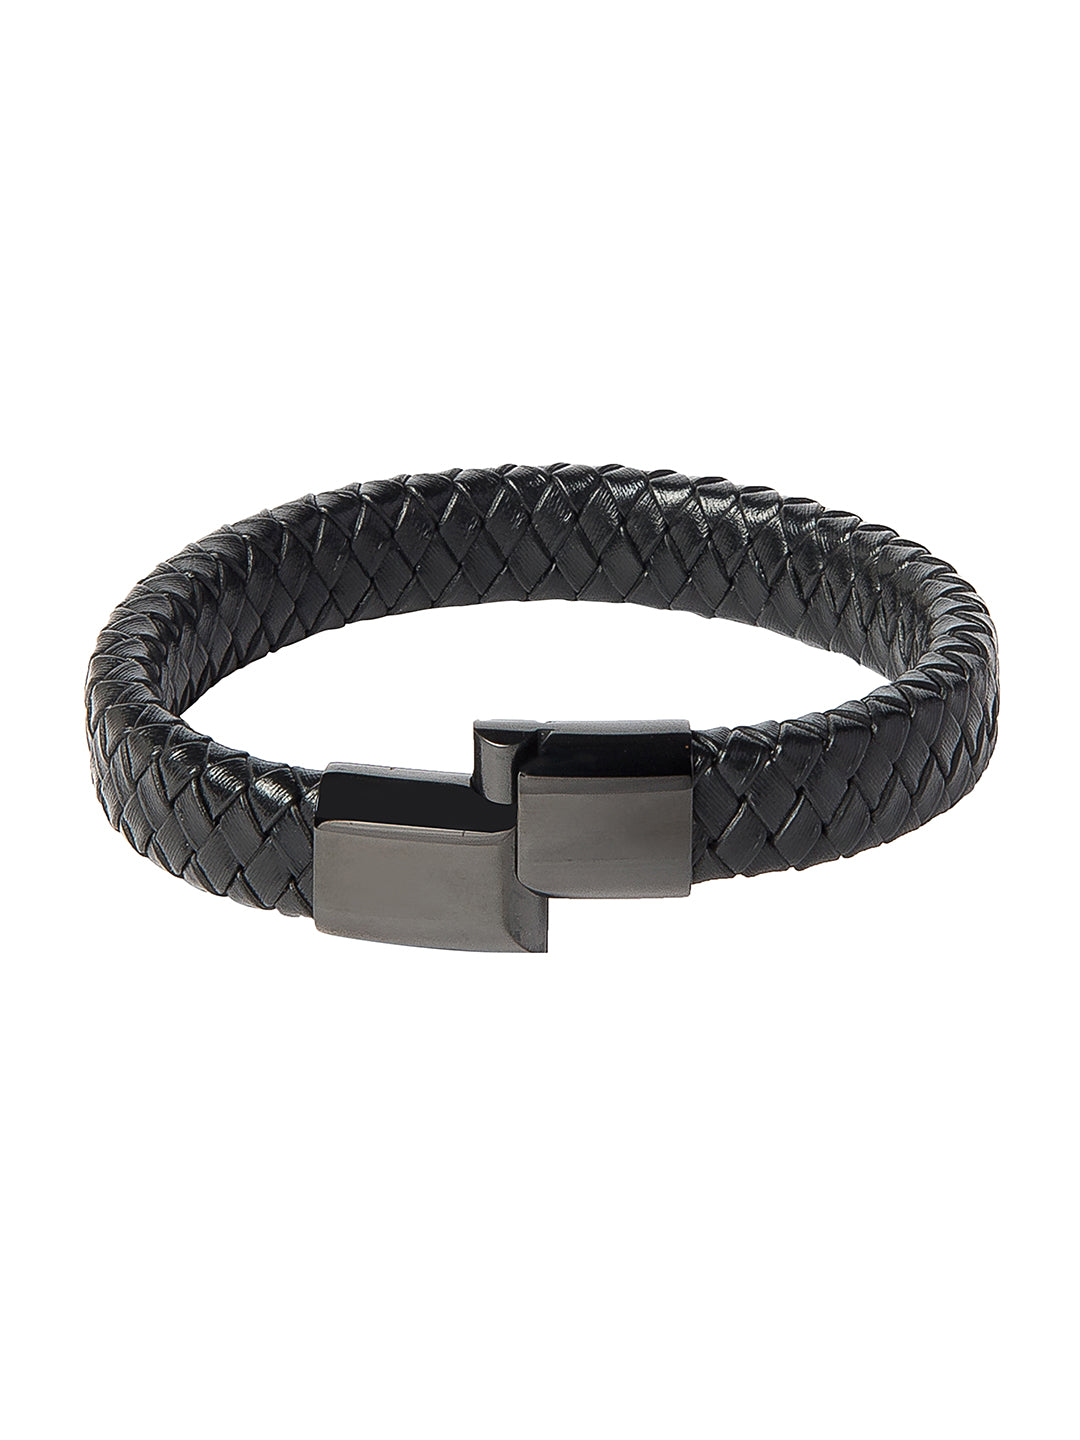 Men's Crucible Brown Twine Stainless Steel Accents Woven Braided Leather  Bangle Bracelet (12mm) - Black (8.5